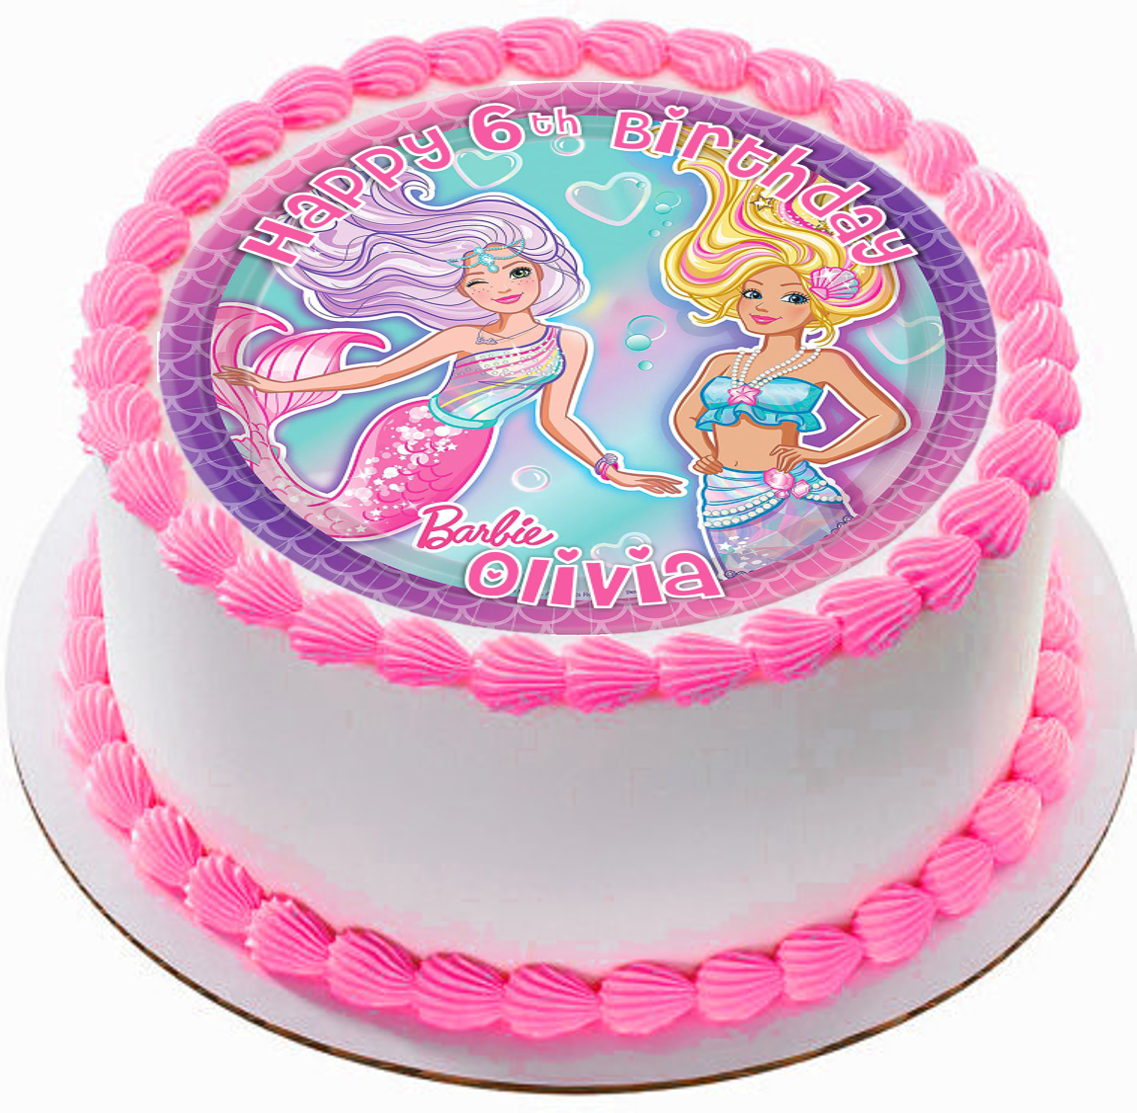 EDIBLE Barbie Mermaids Super-cheap Birthday free Wafer Personalized Topper 7 Cake